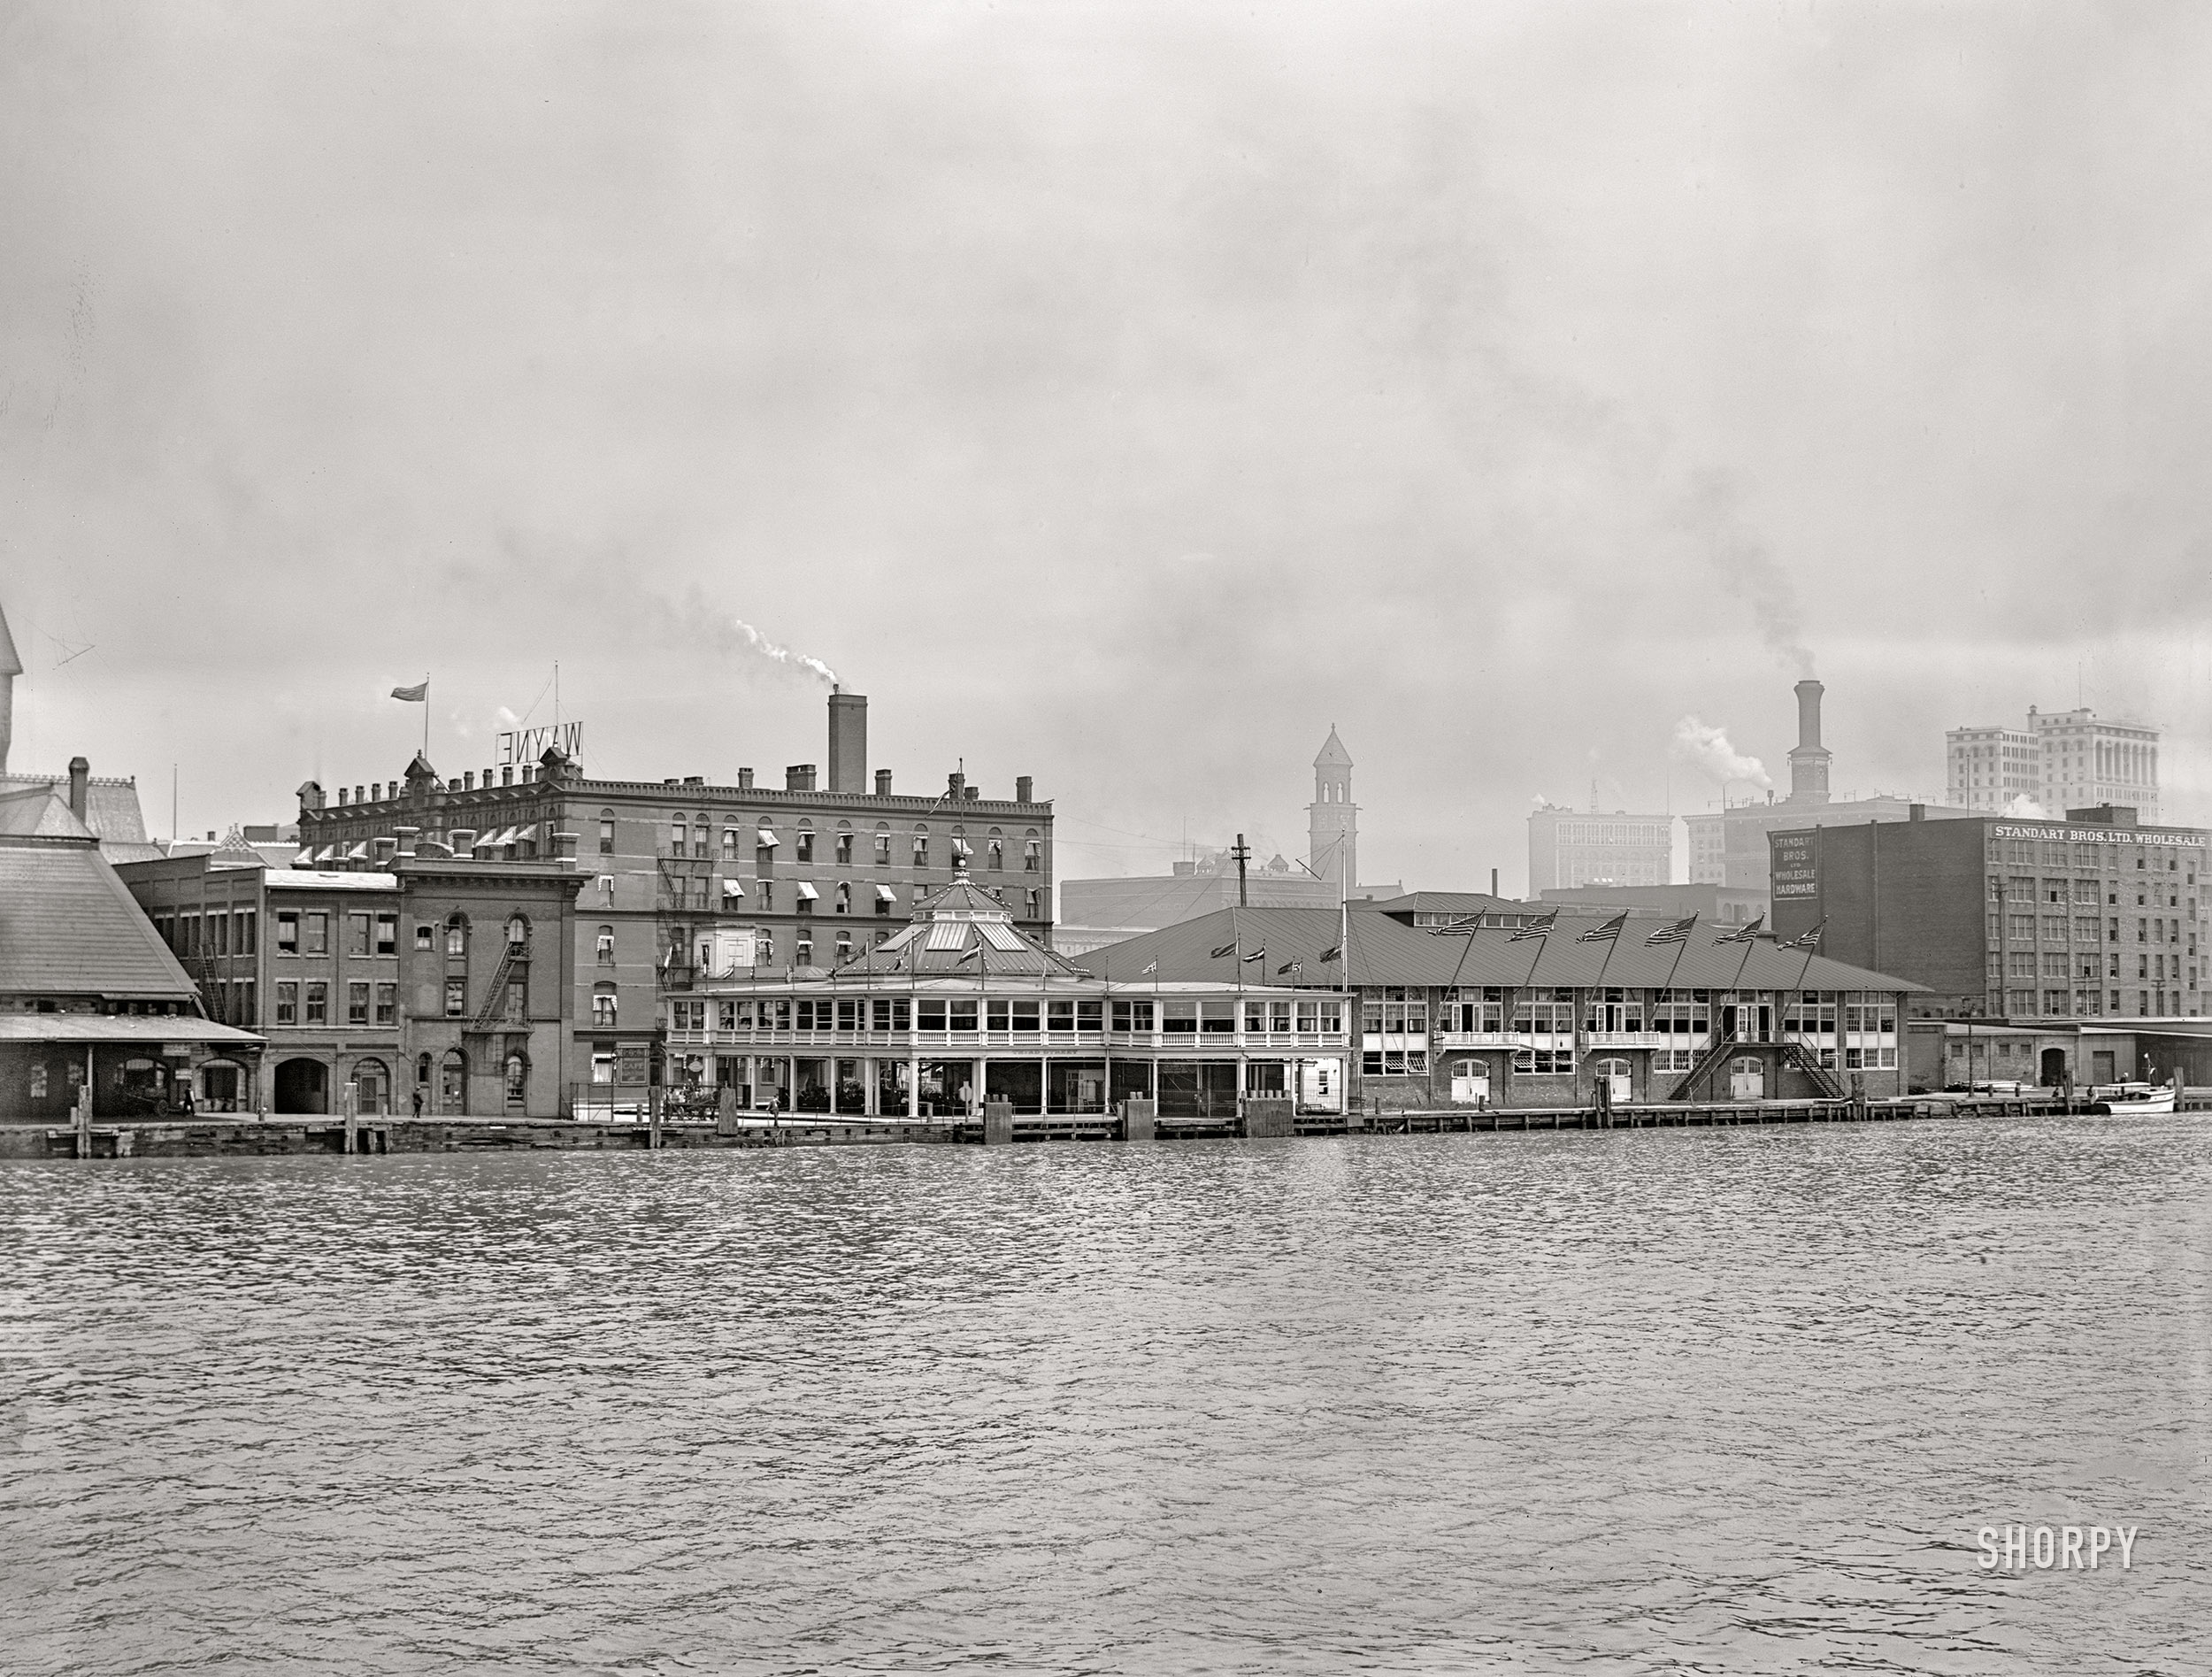 The Detroit River circa 1910. "Wayne Hotel and pavilion from the river." 8x10 inch dry plate glass negative, Detroit Publishing Company. View full size.